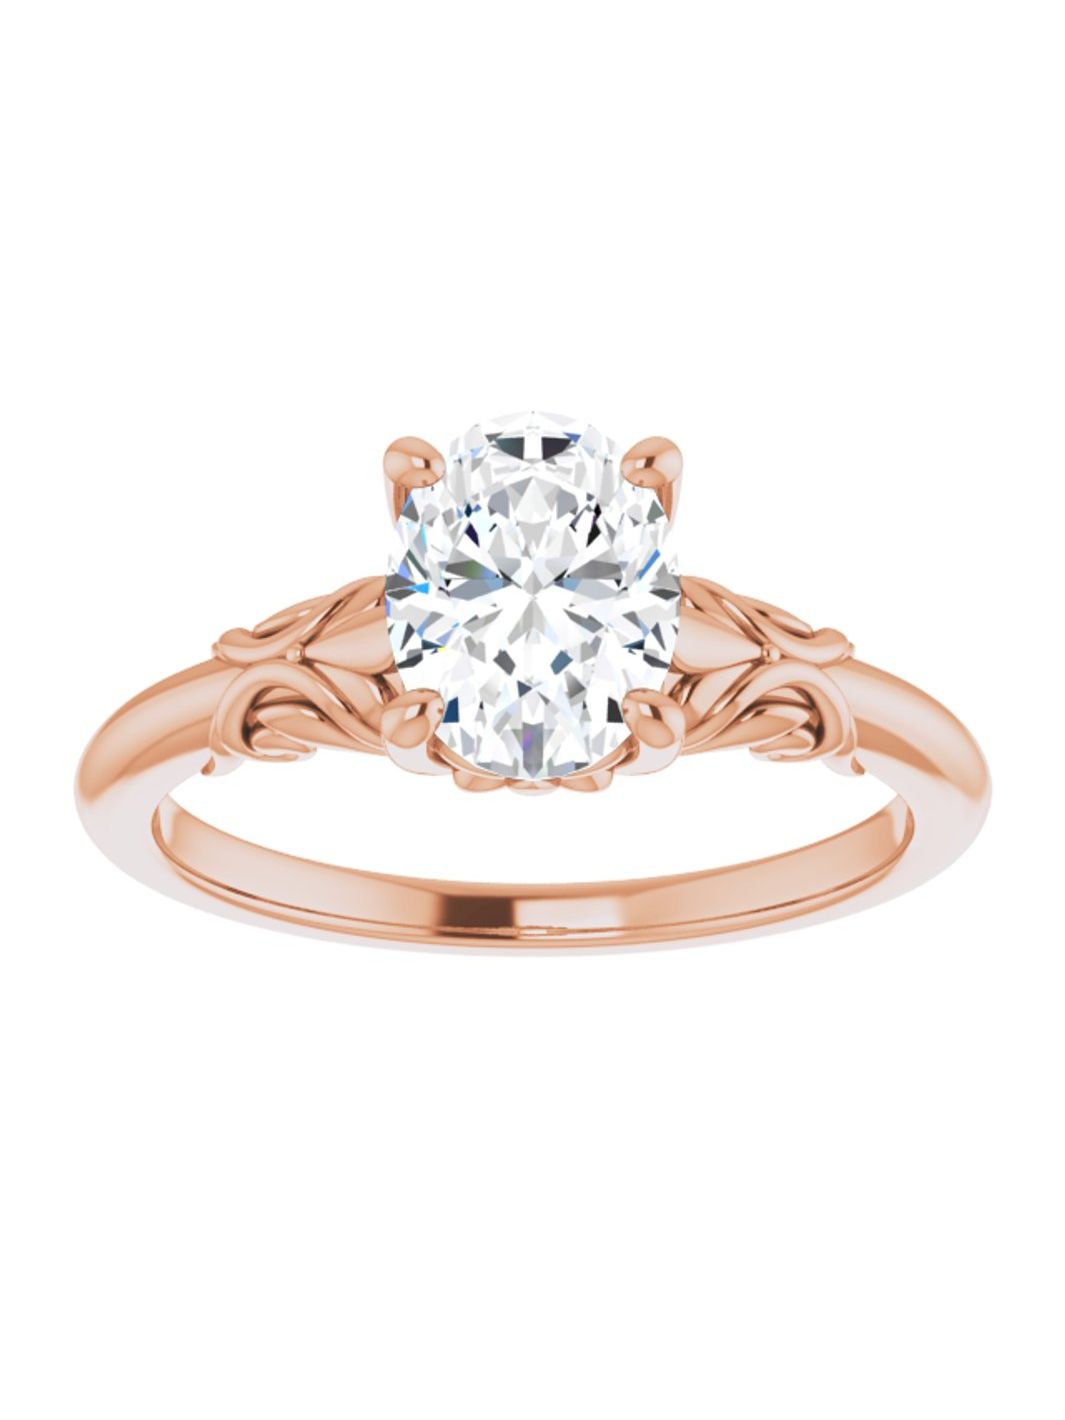 When Is The Best Time To Buy Engagement Rings?